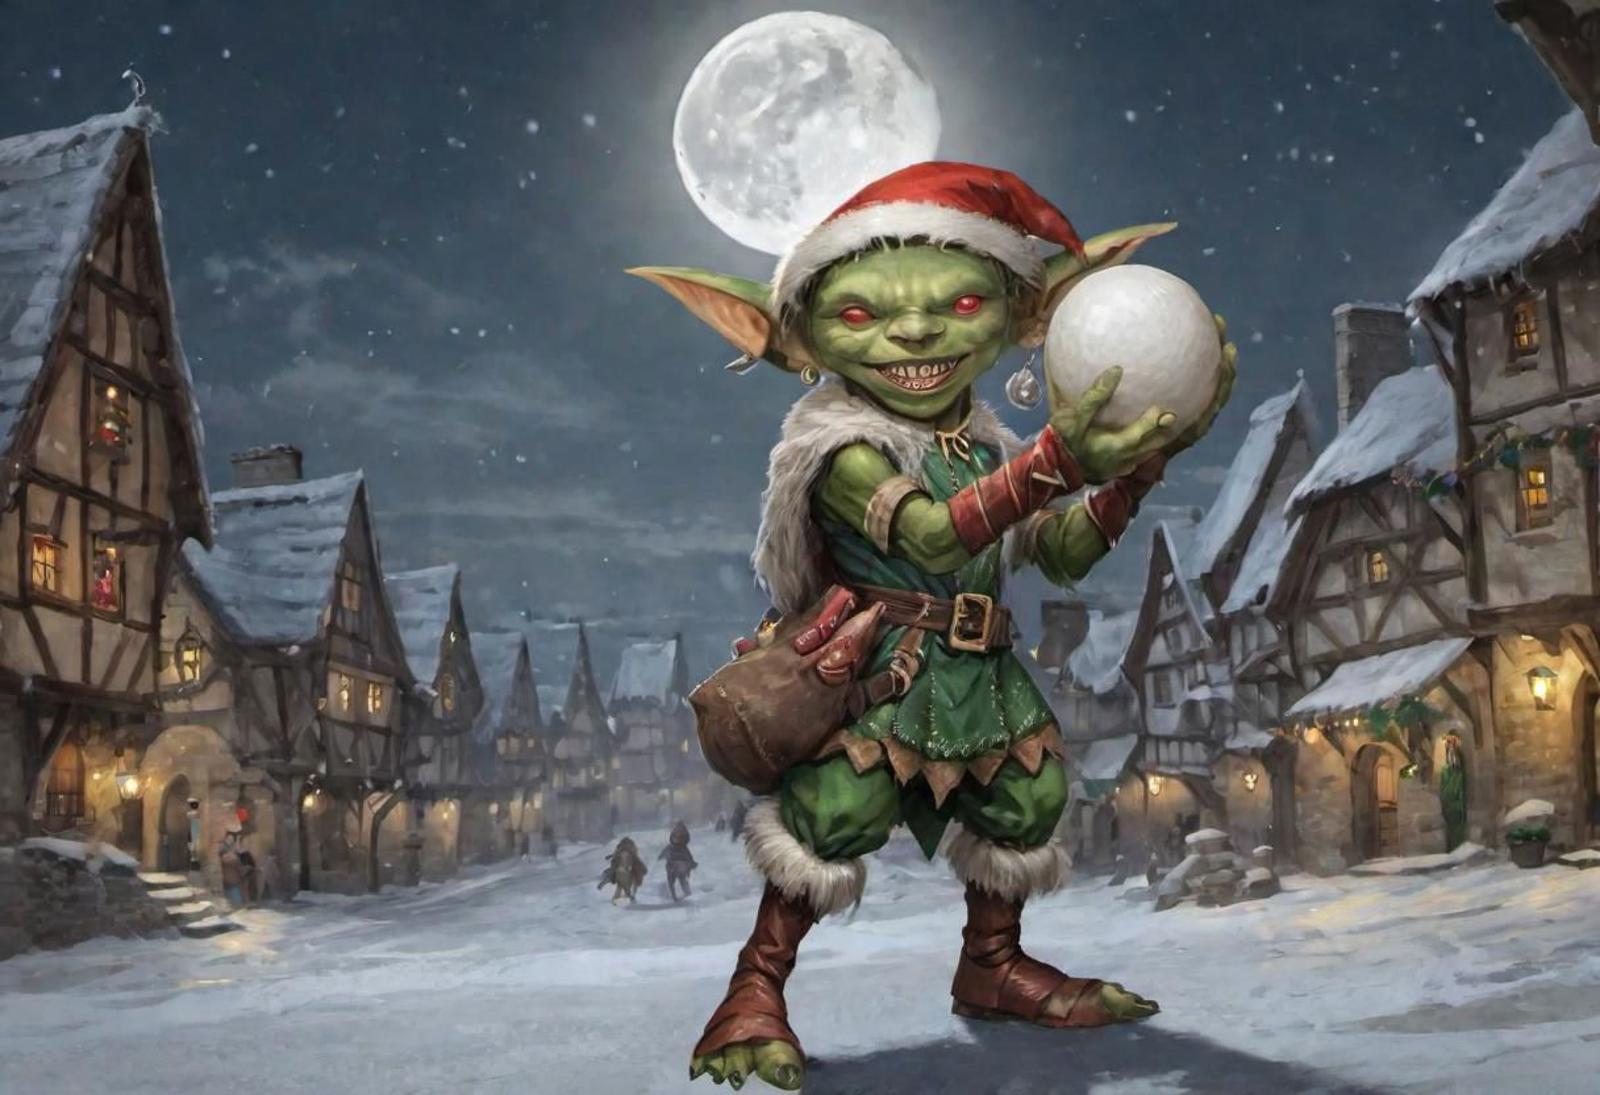 Pathfinder goblin image by the_dyslexic_one582